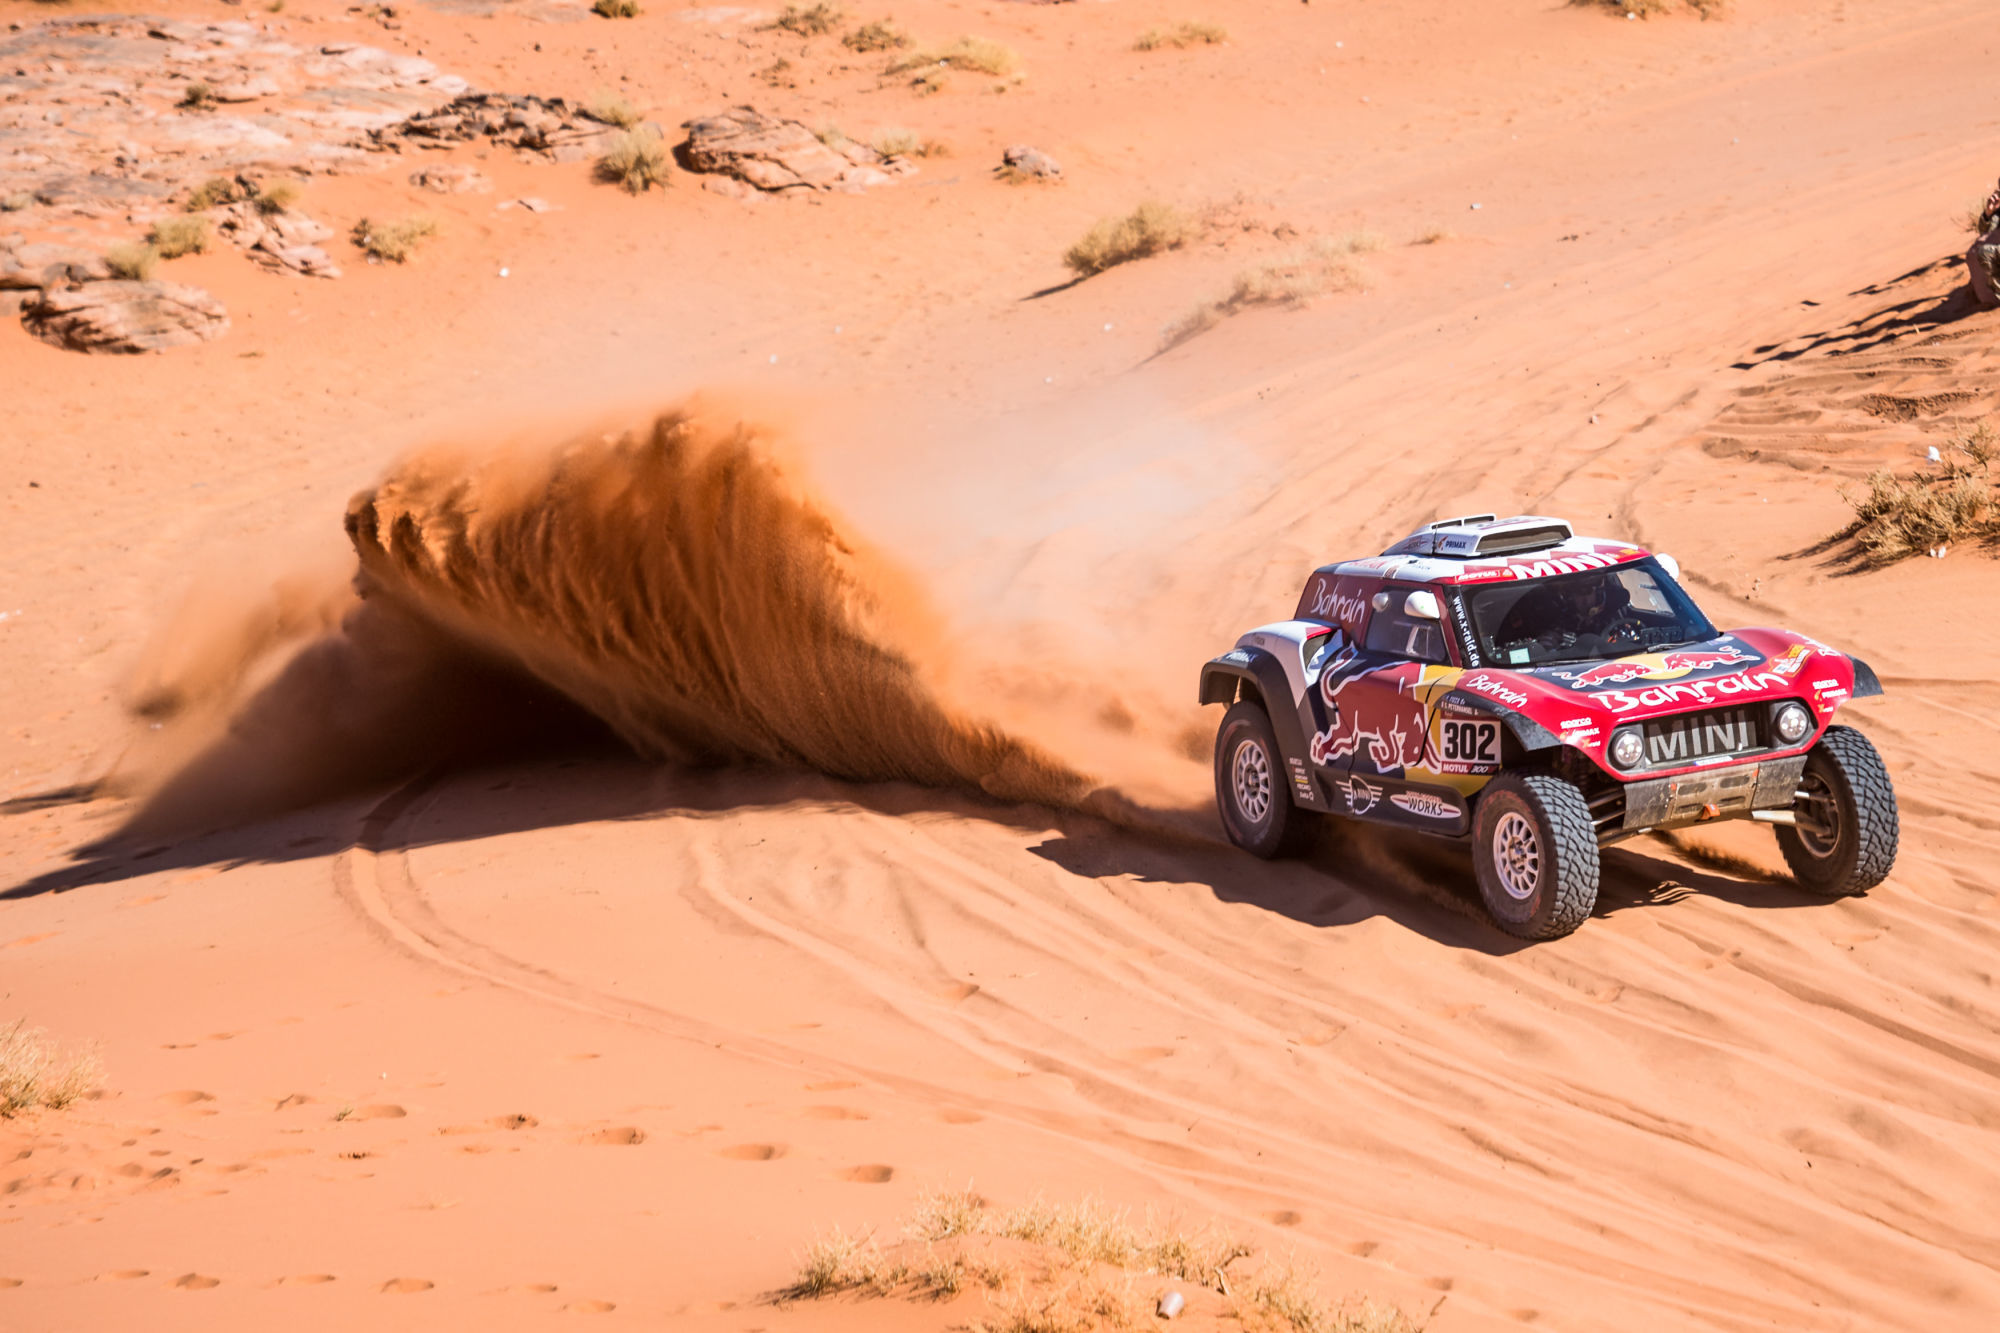 Stephane Peterhansel (FRA) of Bahrain JCW Team races during stage 3 of Rally Dakar 2020 at Neom, Saudi Arabia on January 7, 2020 // Marcelo Maragni/Red Bull Content Pool // AP-22QQS2S252111 // Usage for editorial use only // 

Photo by Icon Sport - Stephane PETERHANSEL